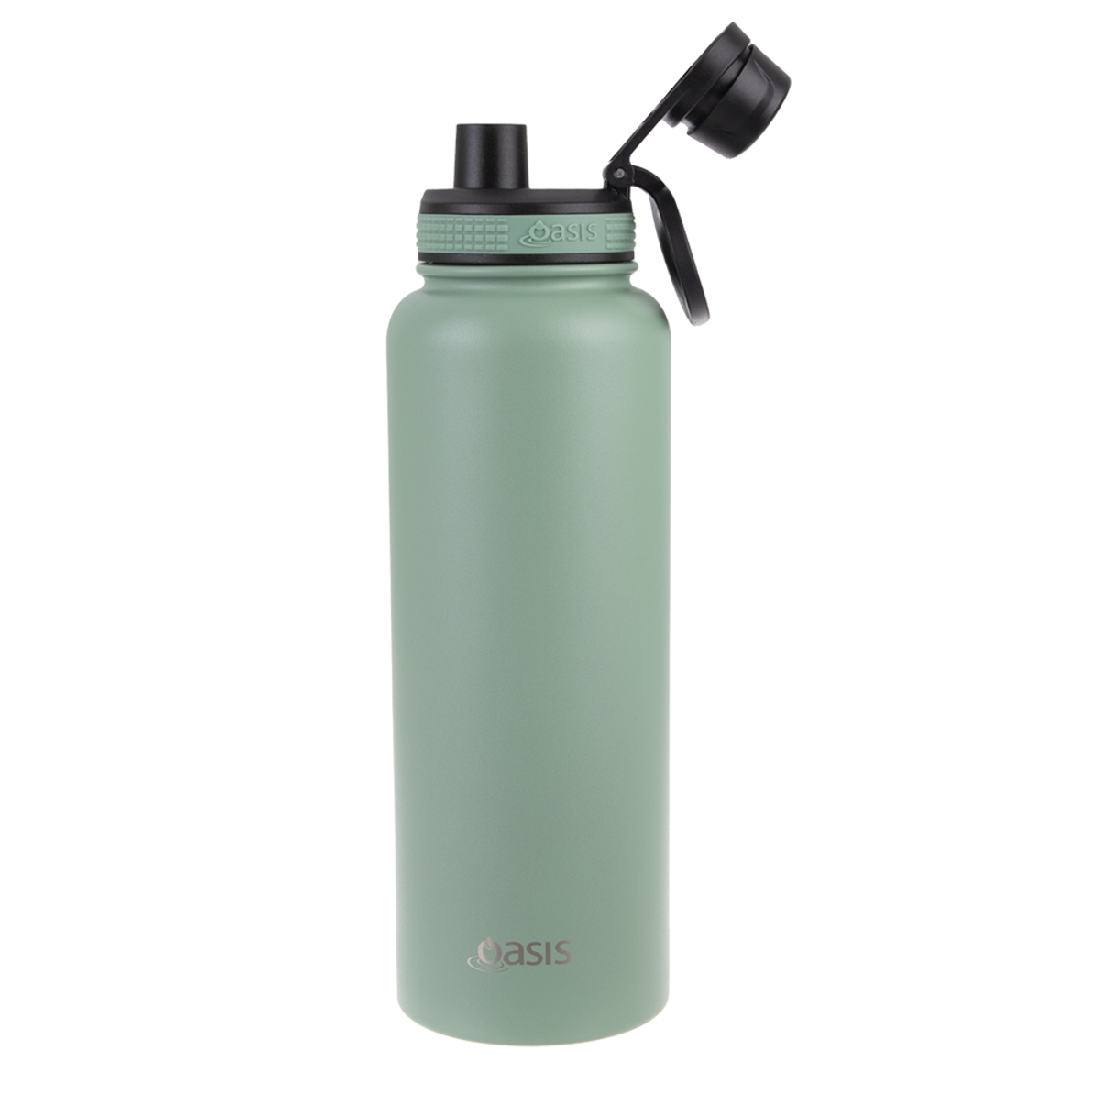 Oasis S/s Double Wall Insulated "challenger" Sports Bottle W/ Screw Cap 1.1l - Sage Green